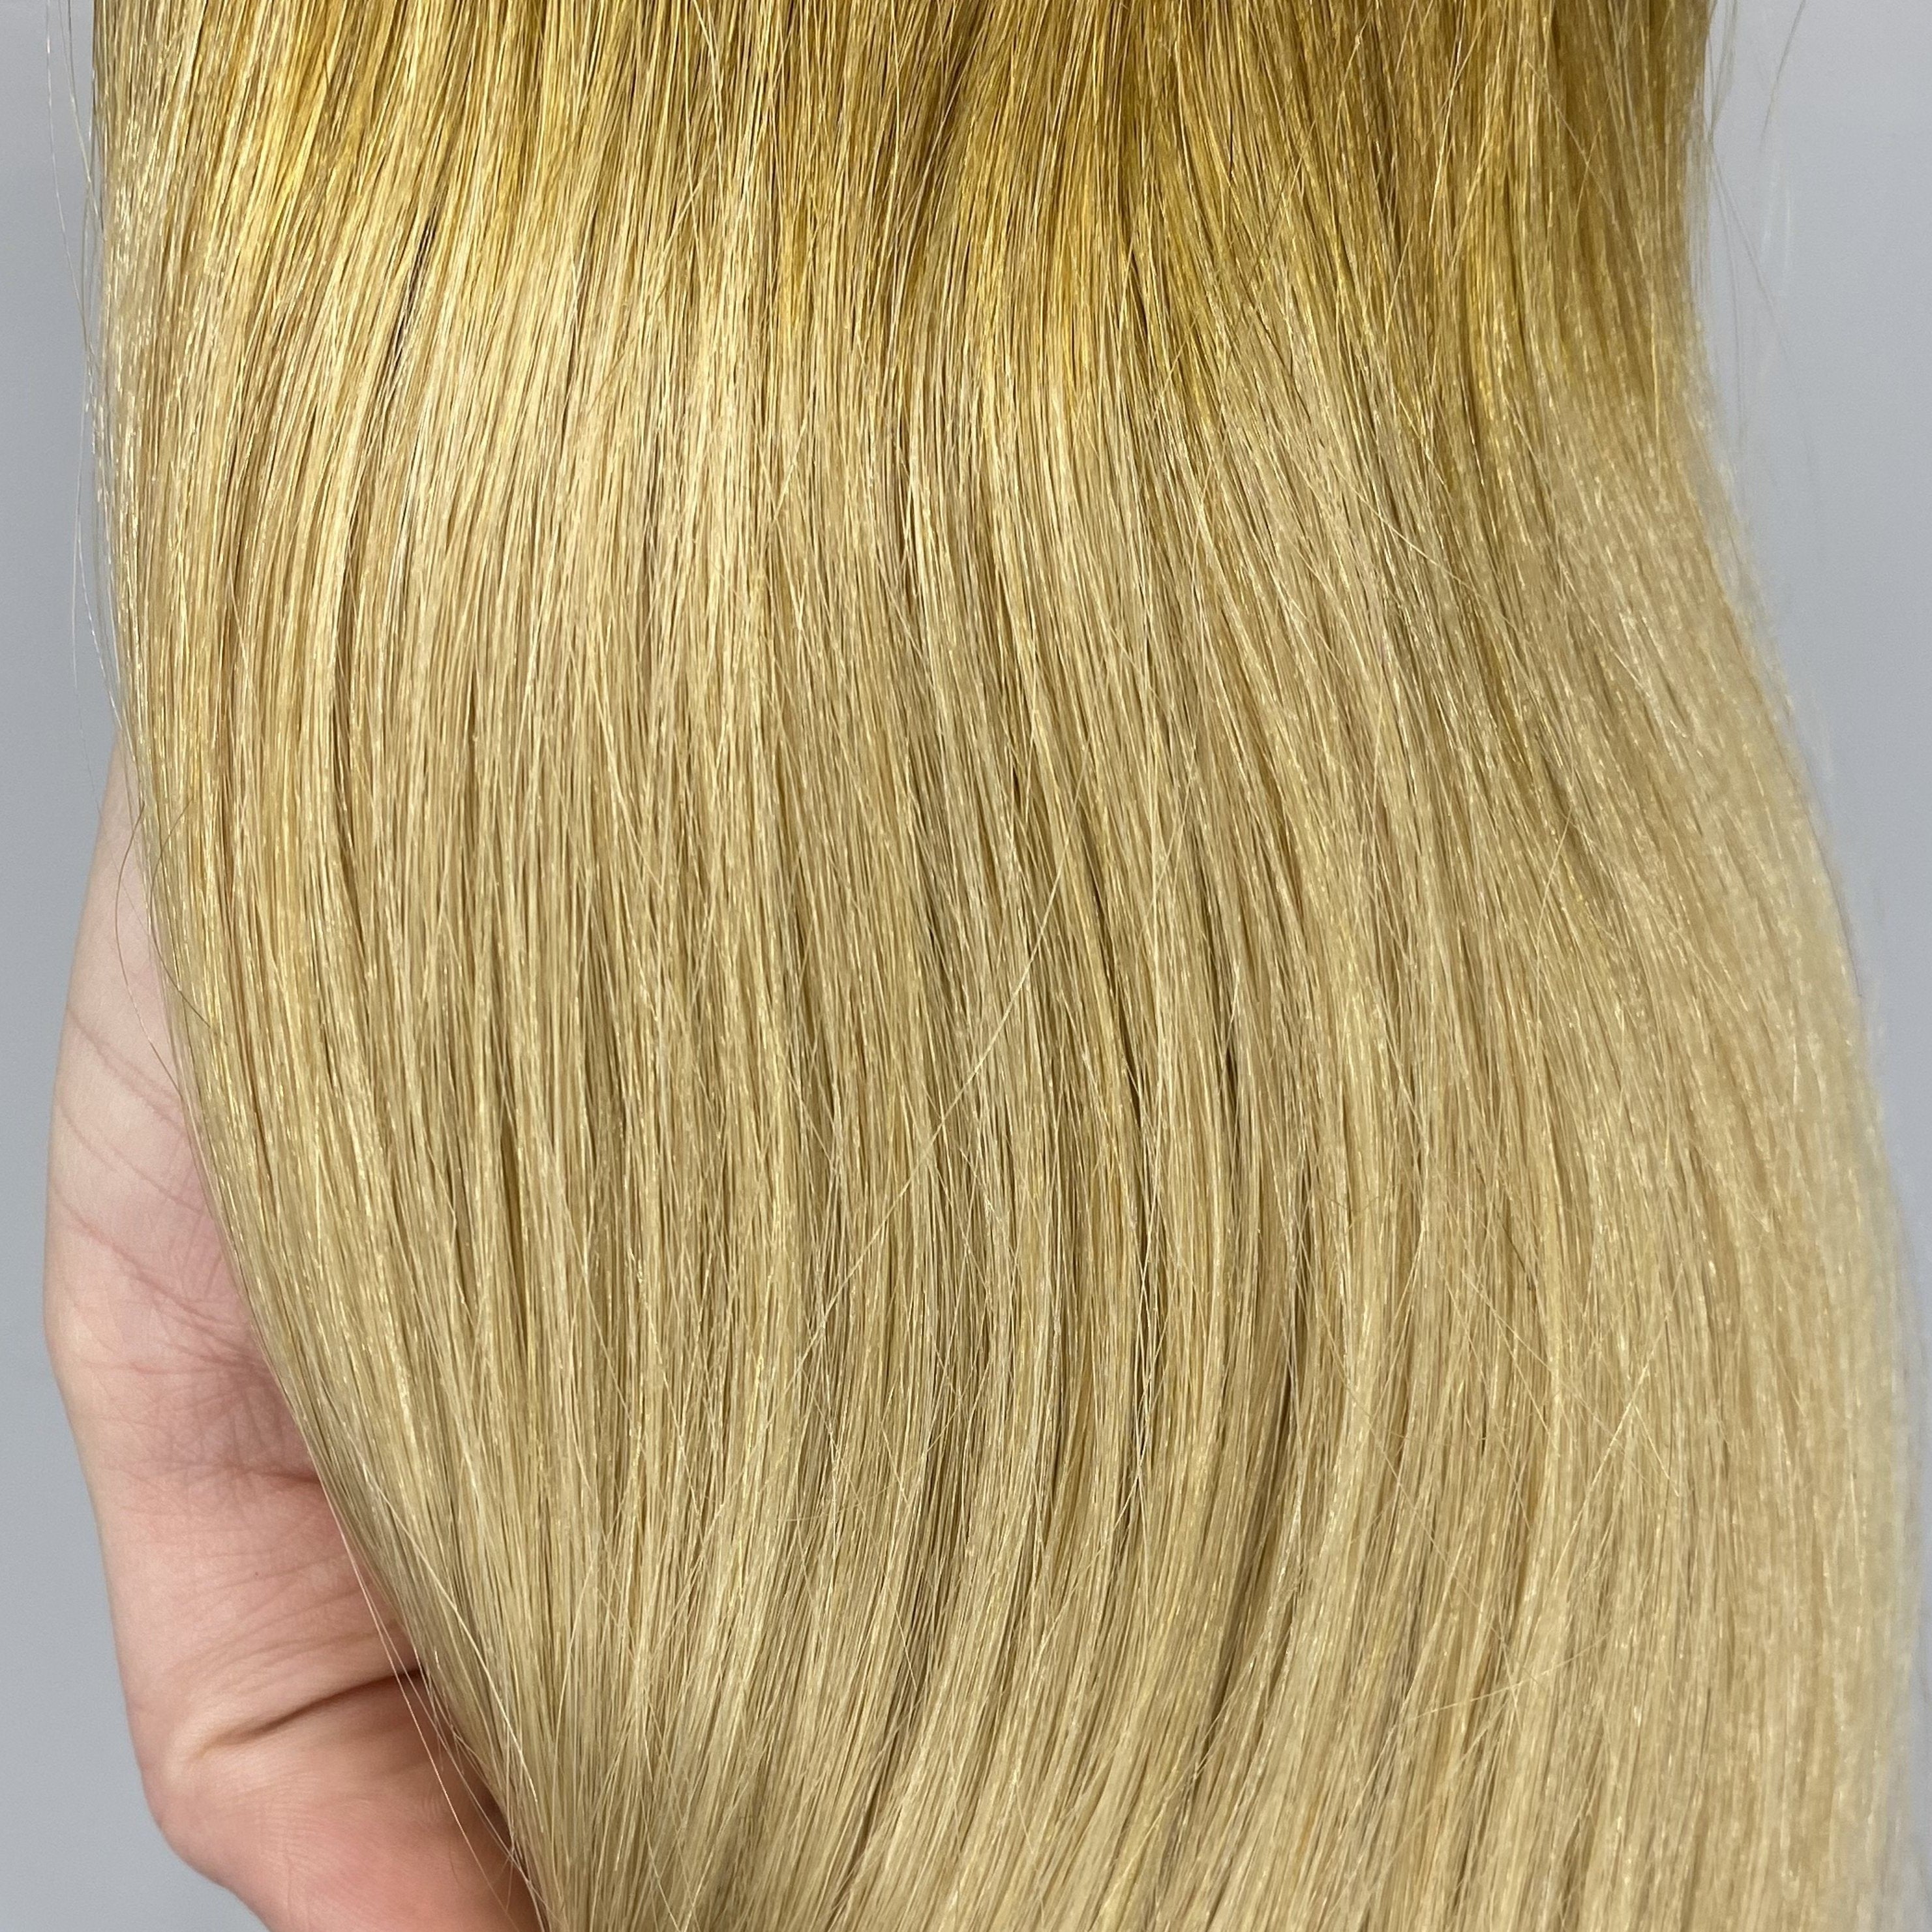 Velo Sale #6&16 - 20 inches - Copper Golden Blonde into Light Golden Blonde Ombre